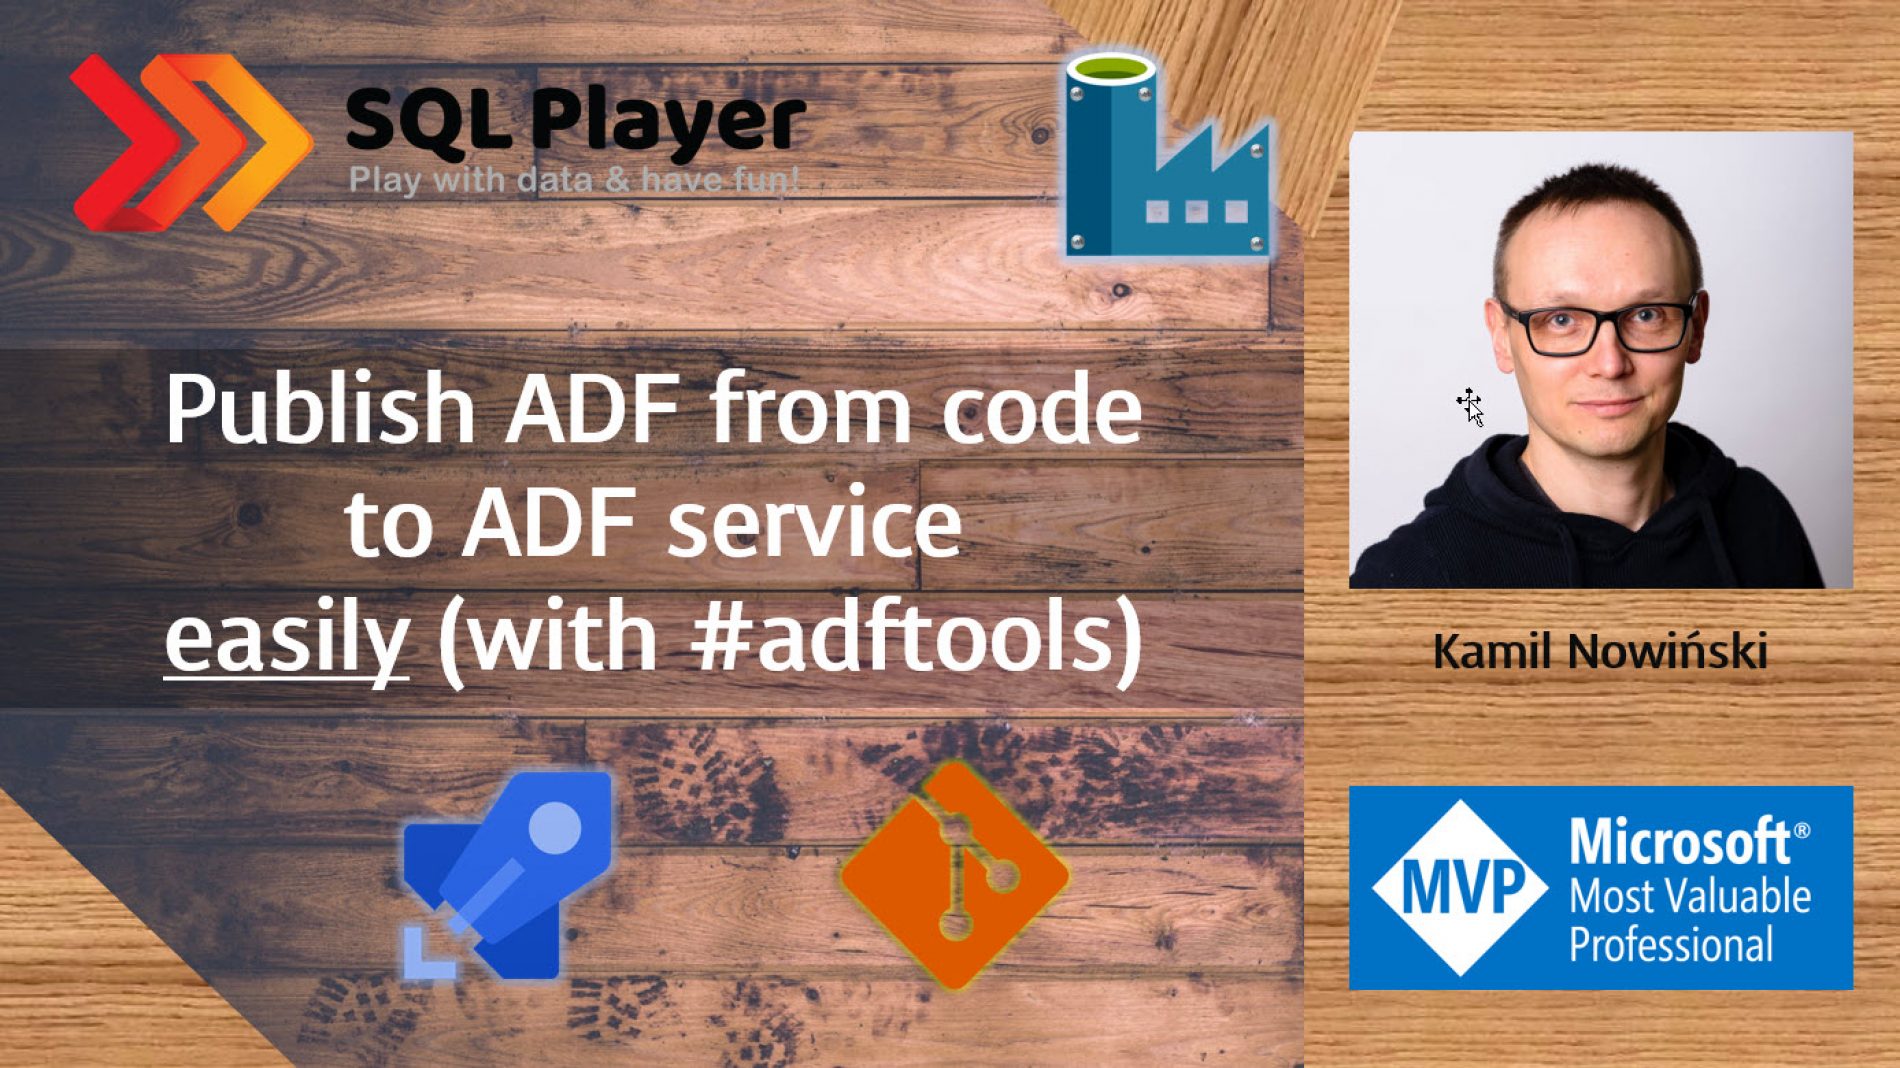 Publish ADF from code to service easily